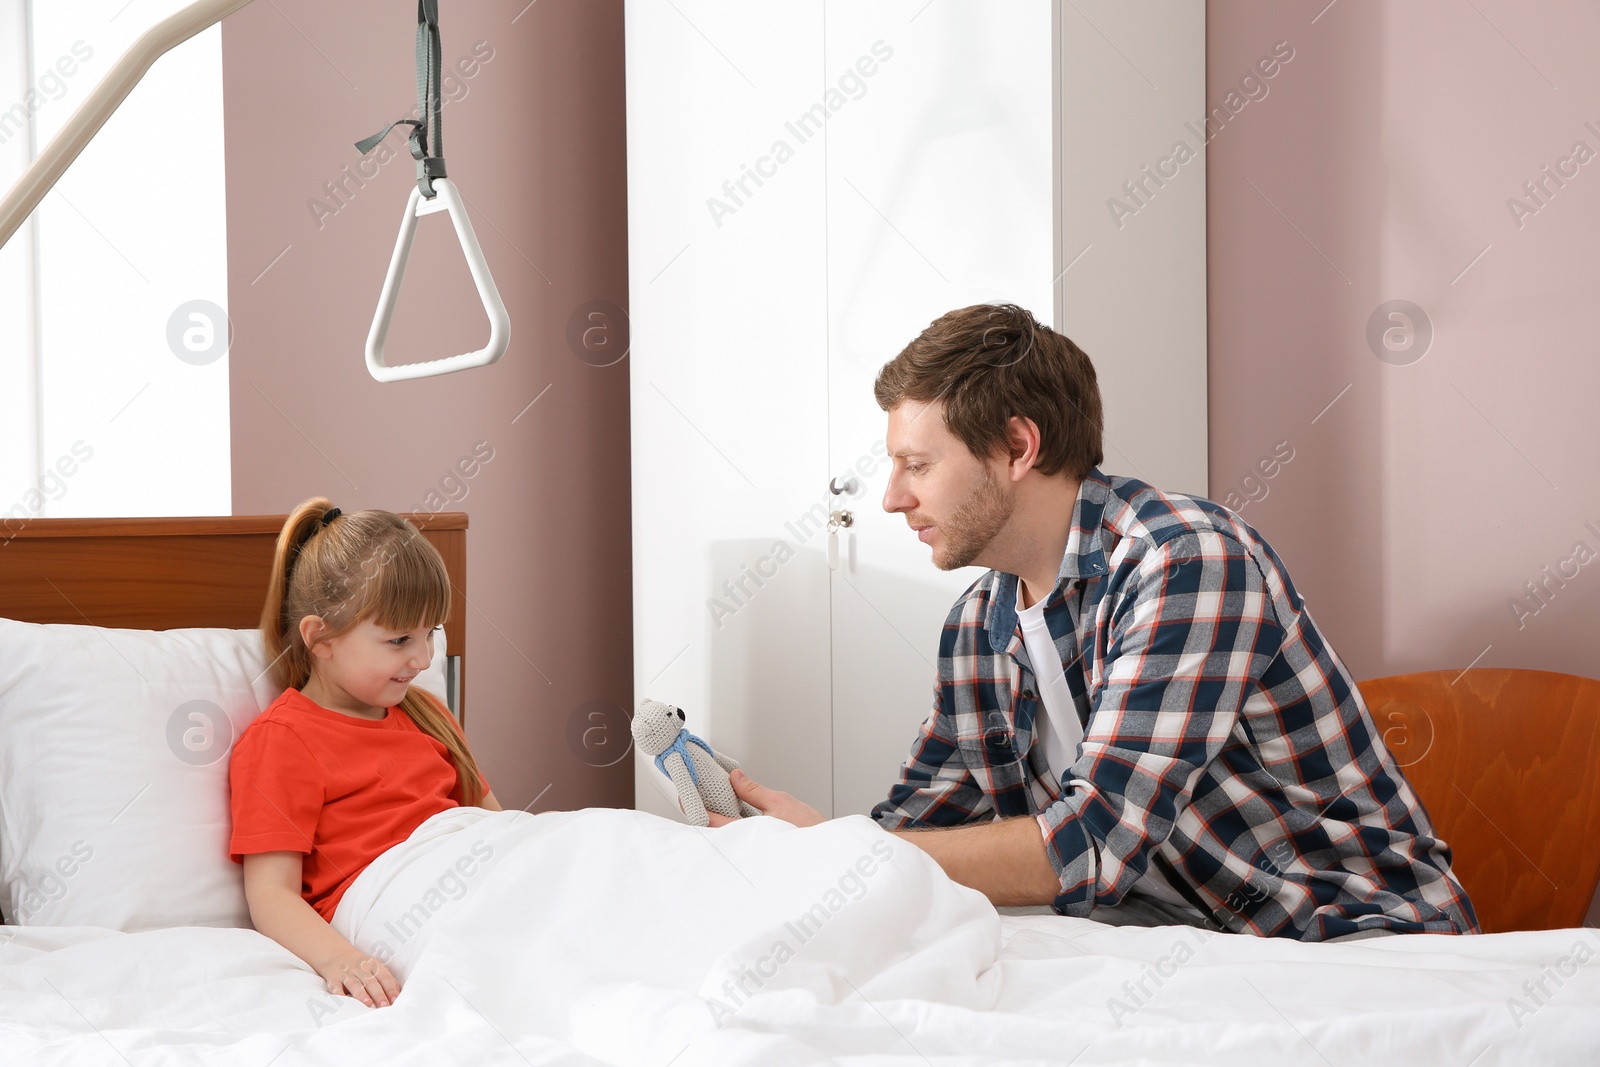 Photo of Man visiting his little child in hospital